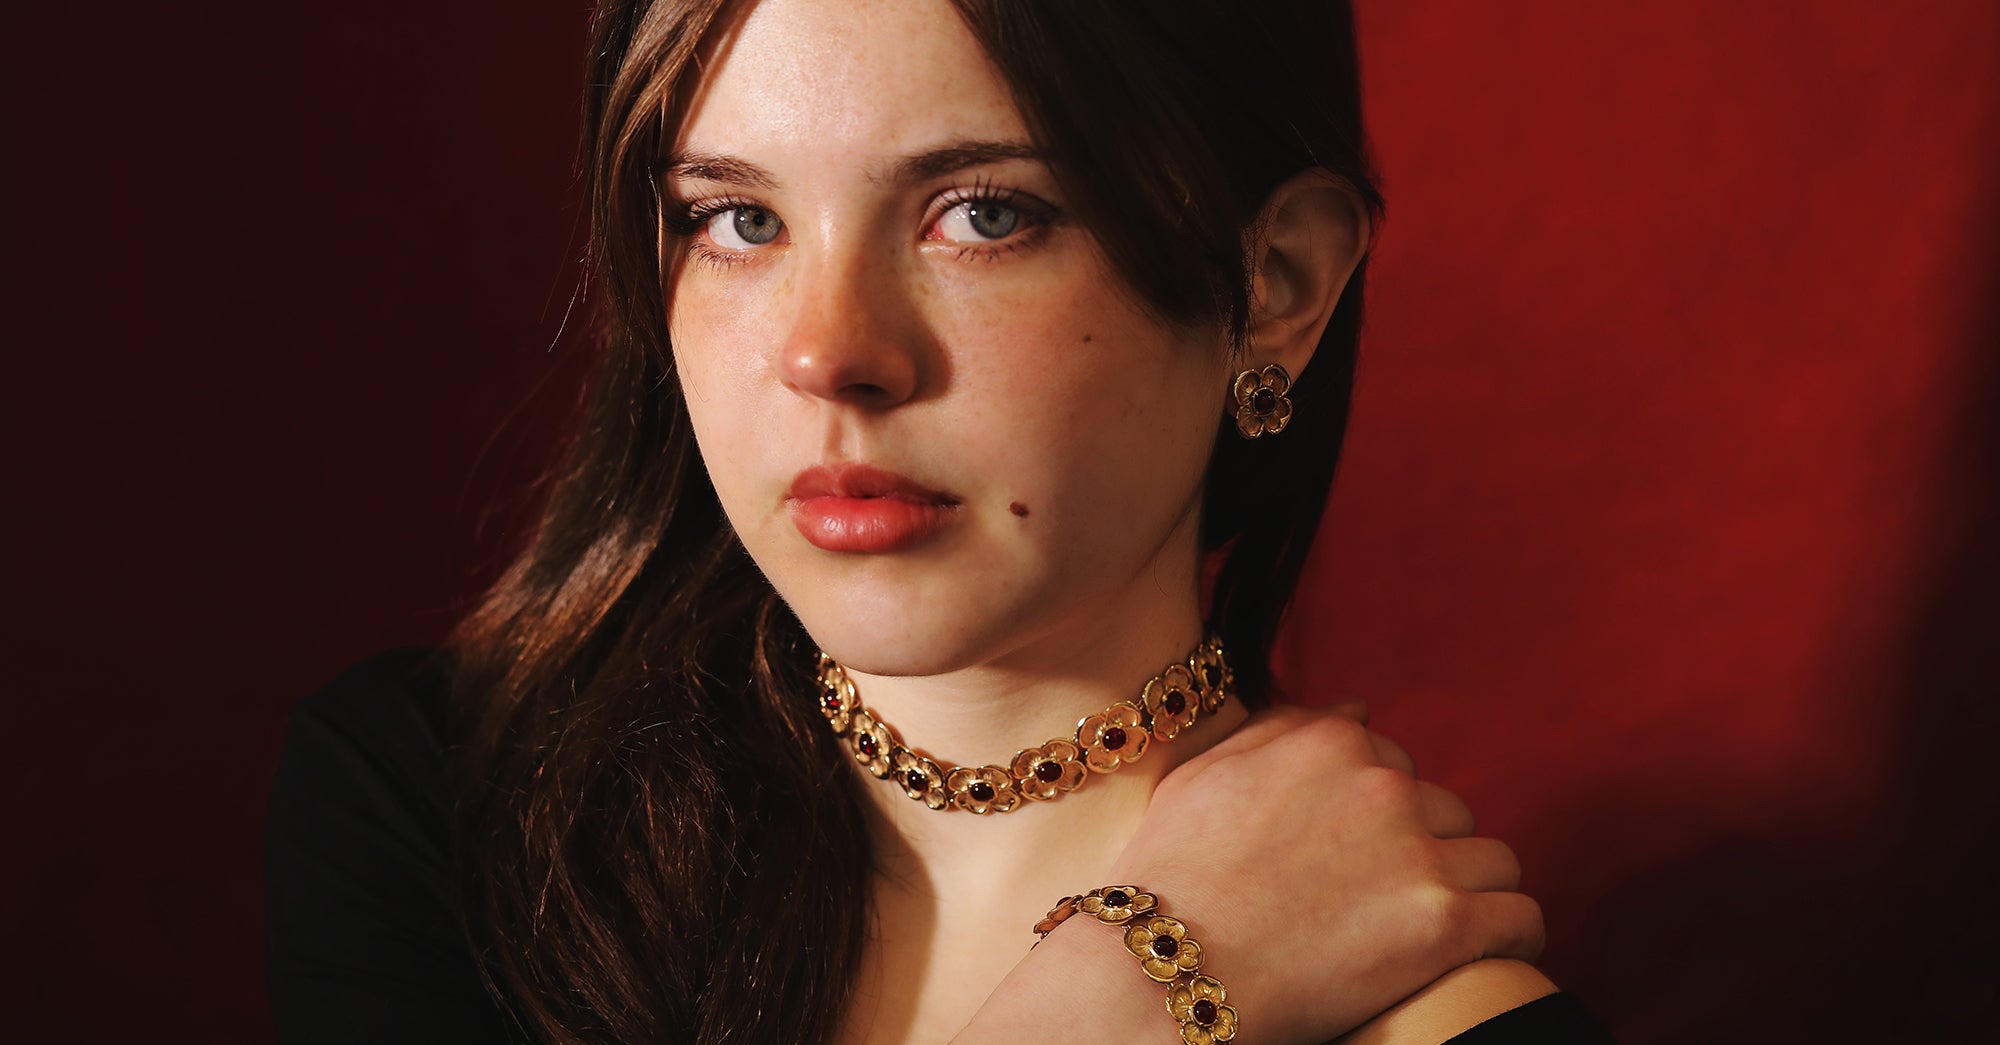 pretty young woman wearing a flowered choker, bracelet and earrings on a dark red background